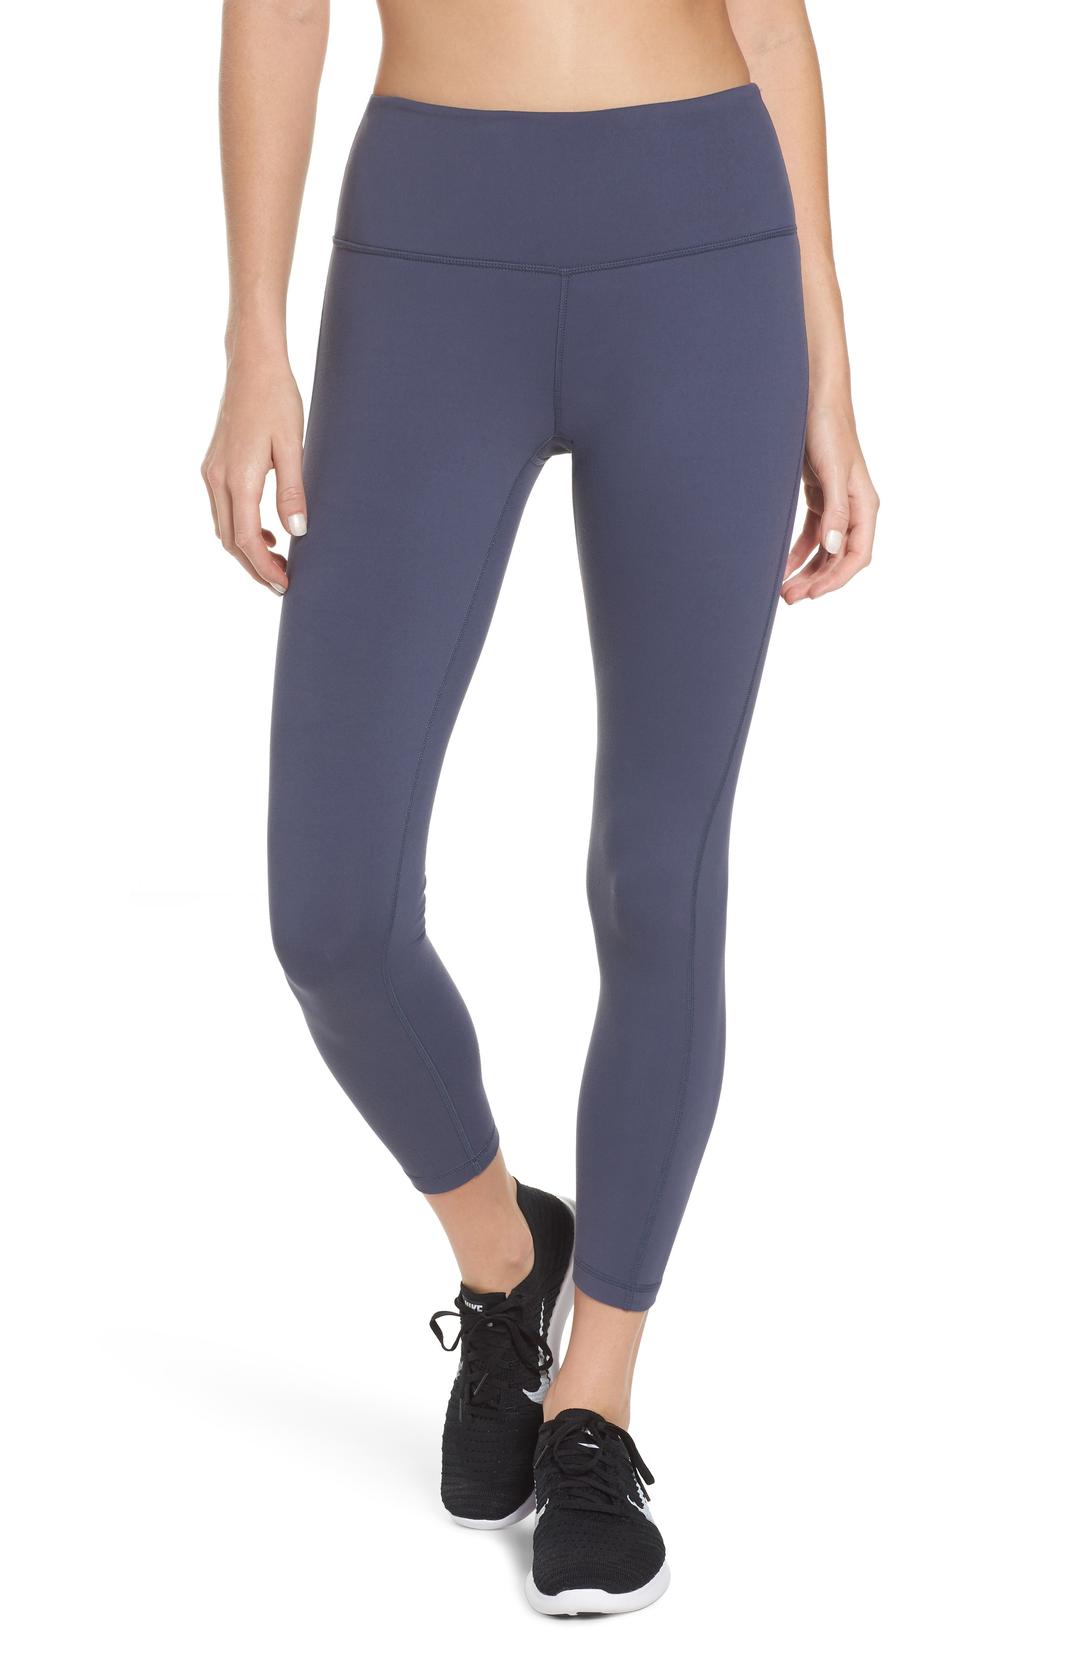 15 Minute Best Workout Tights For Big Thighs with Comfort Workout Clothes